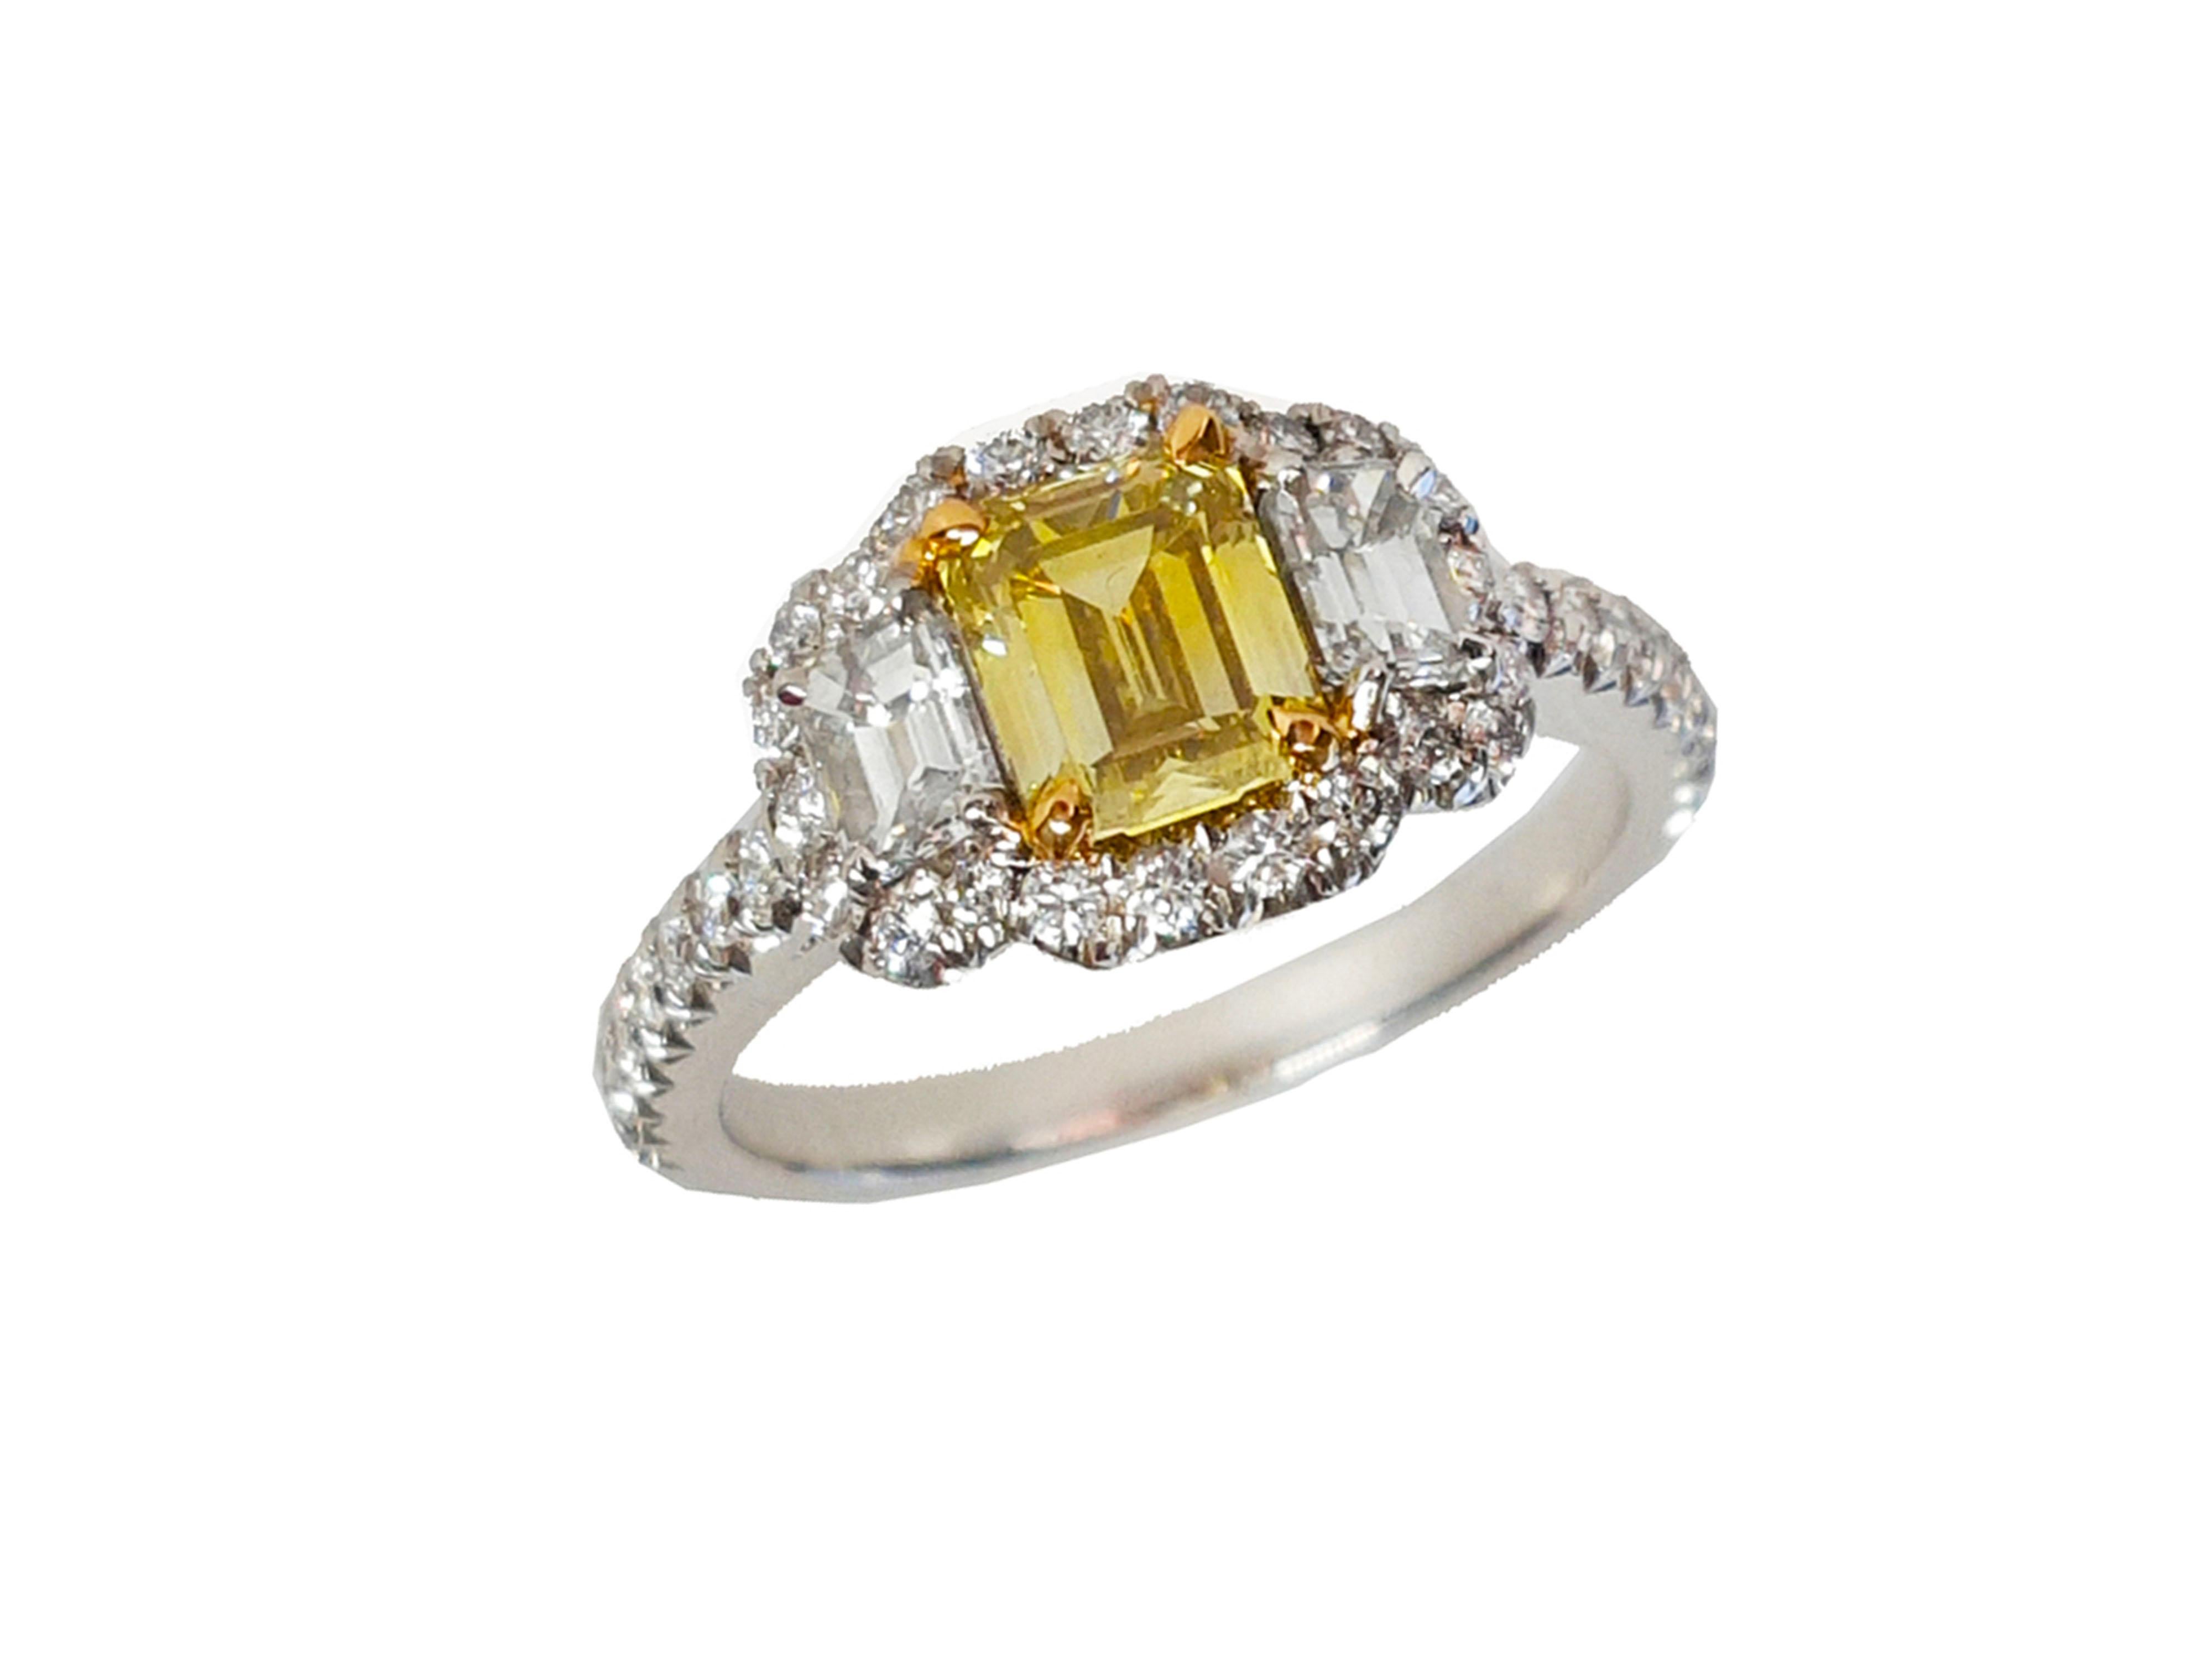 Contemporary 1 Carat Fancy Intense Yellow Diamond Engagement 3 Stones Ring, GIA Certified For Sale